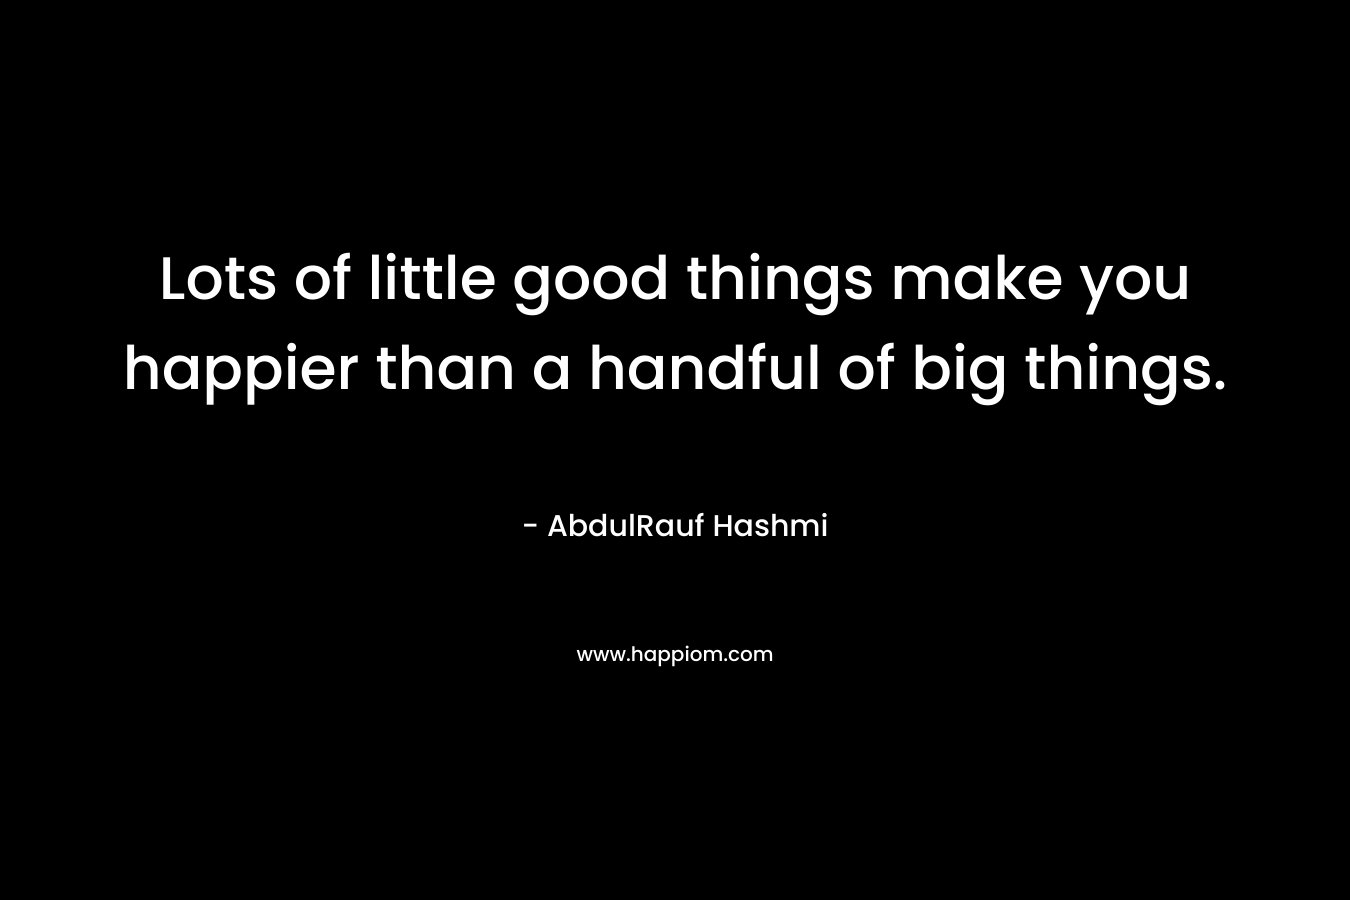 Lots of little good things make you happier than a handful of big things. – AbdulRauf Hashmi